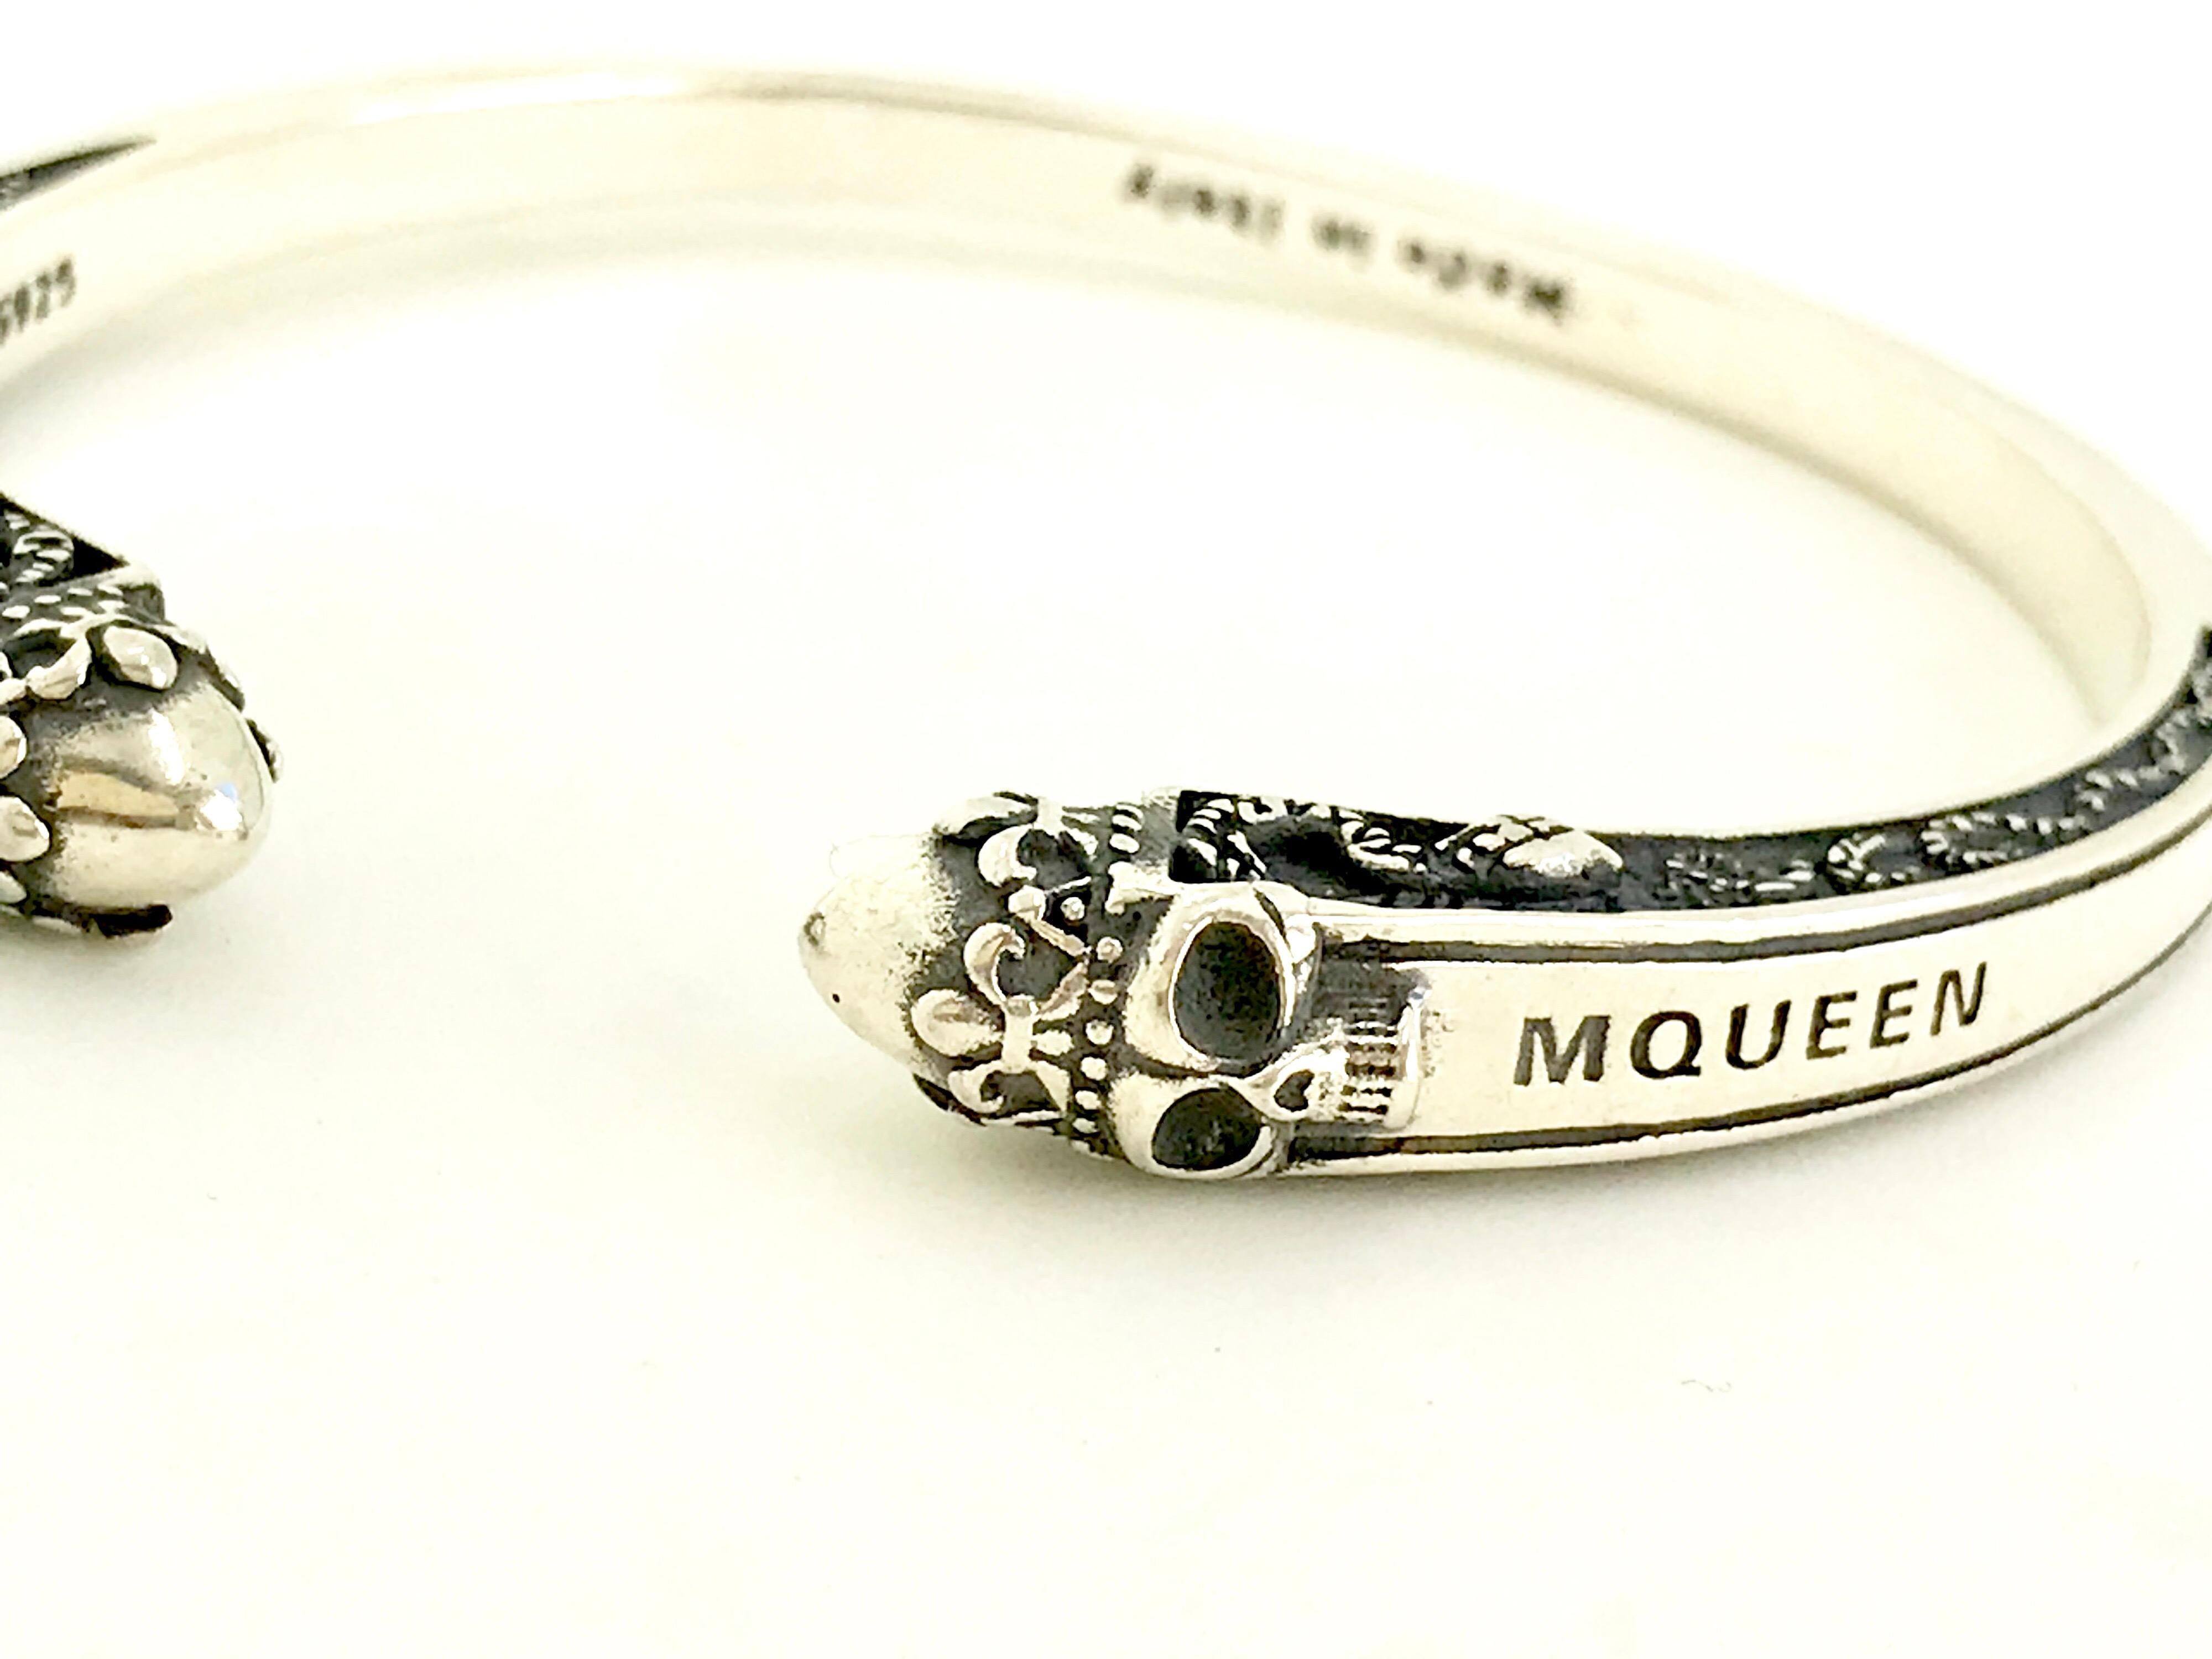 Alexander McQueen Skull Silver Bracelet.  SIgned Alexander Mcqueen.  Made in Italy and sterling silver hallmark can be seen on inside.

Circumference: 19cm
Width: 0.7cm

Adjustable size

Excellent condition

